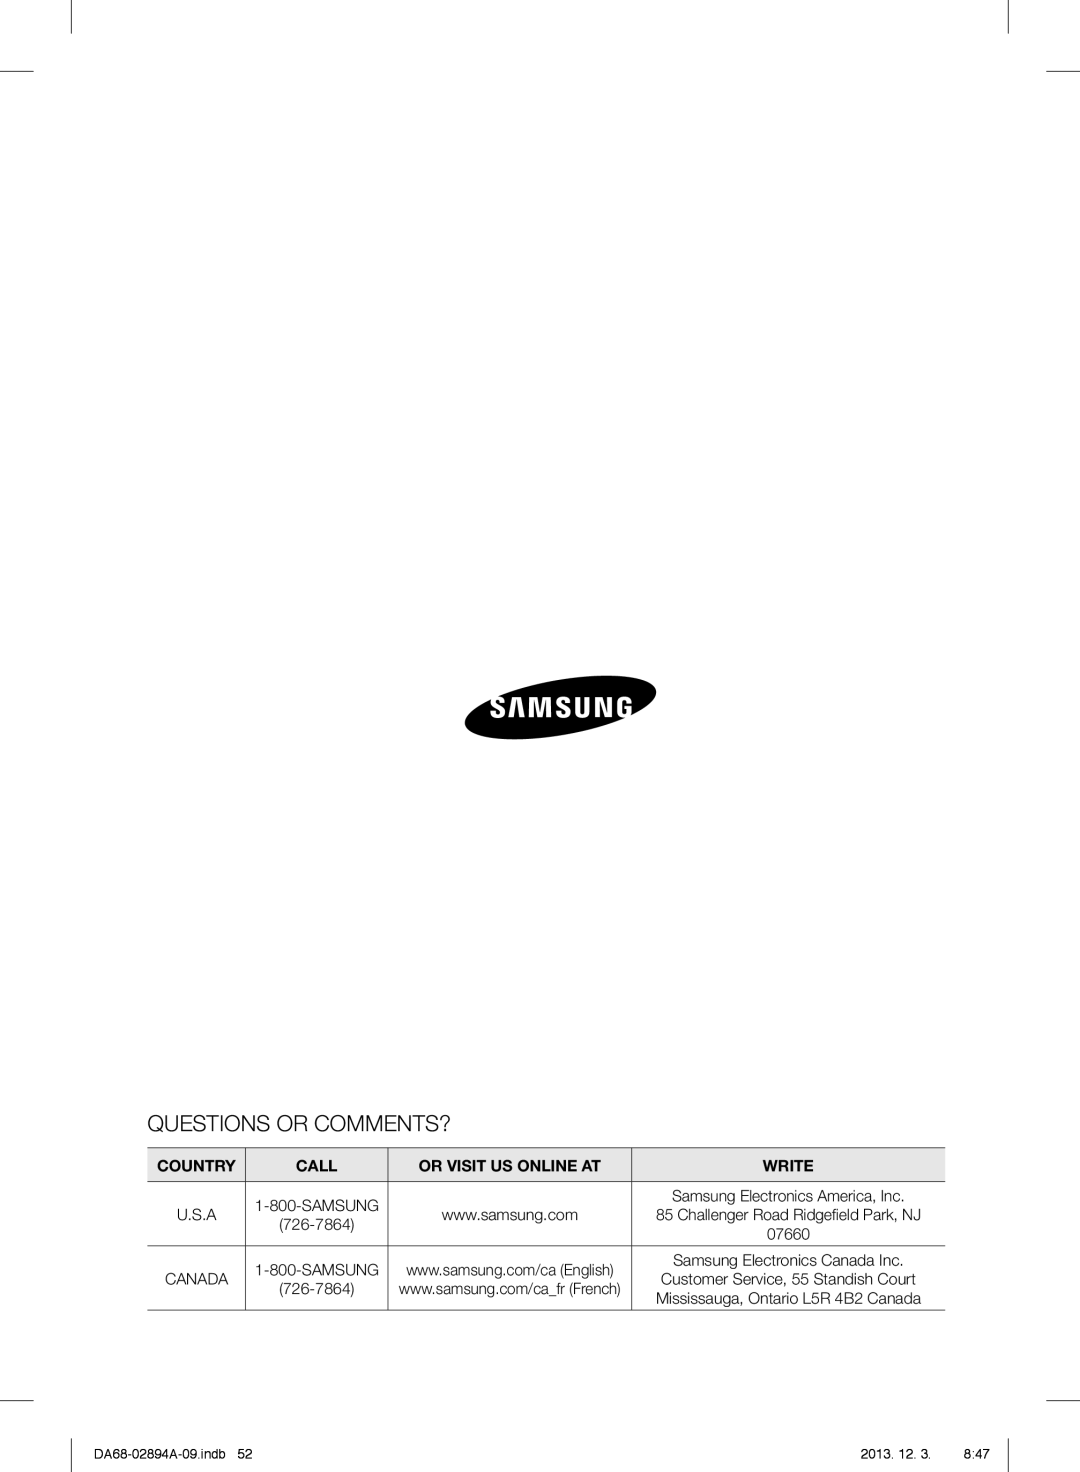 Samsung RF31FMEDBBC Questions Or Comments?, Country, Call, Or Visit Us Online At, Write, DA68-02894A-09.indb, 2013. 12. 3 